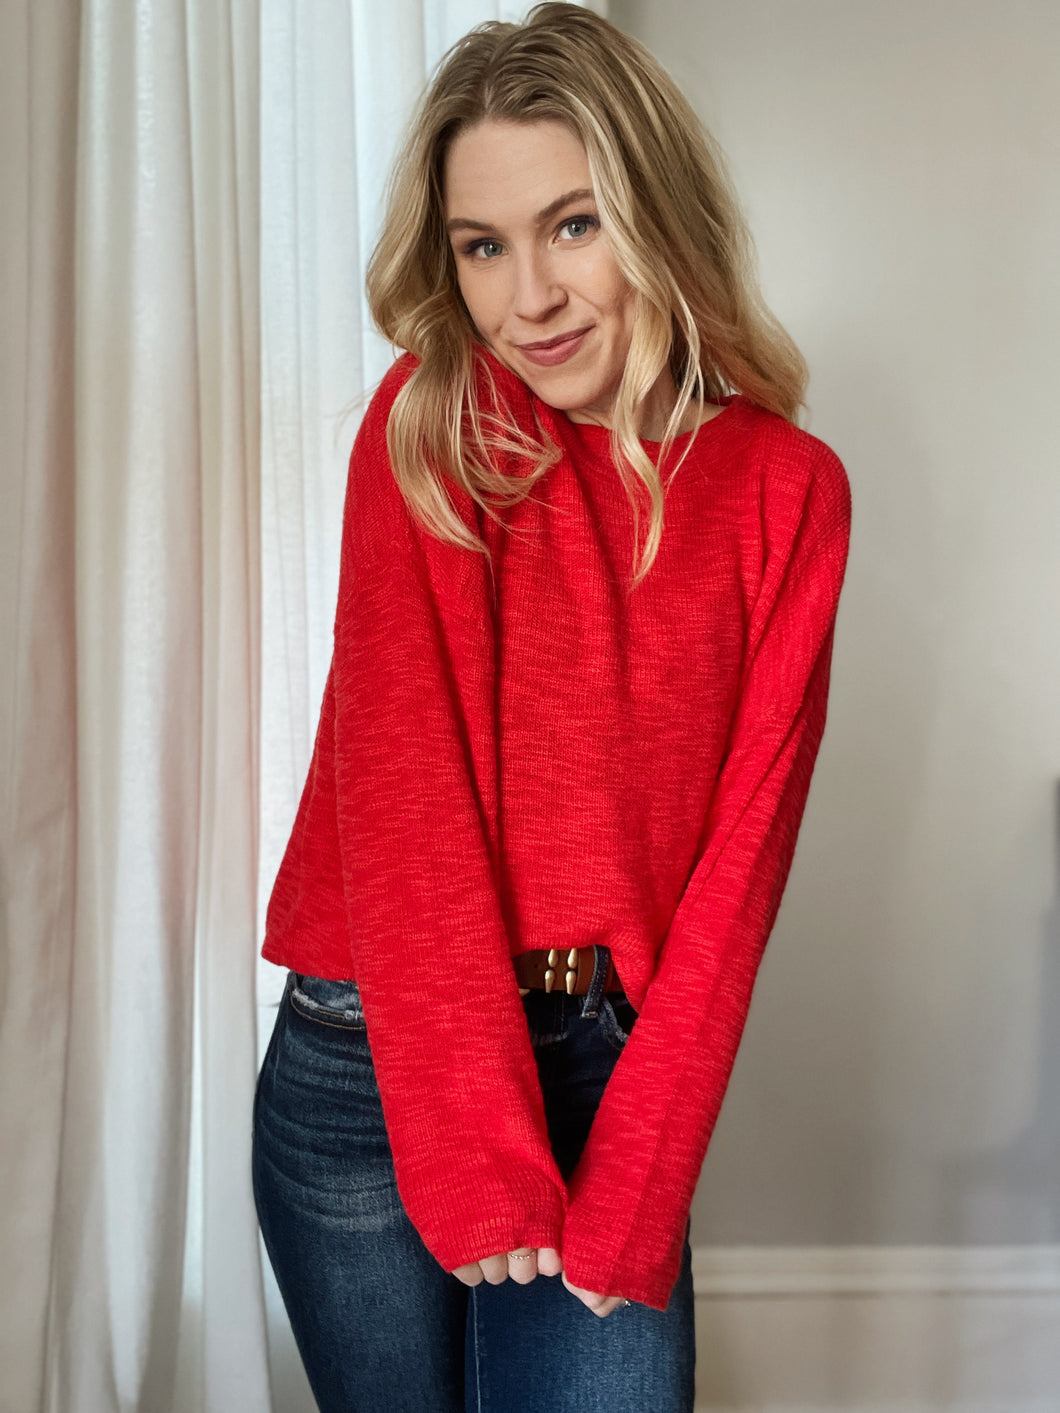 Rayla Red Knit Sweater